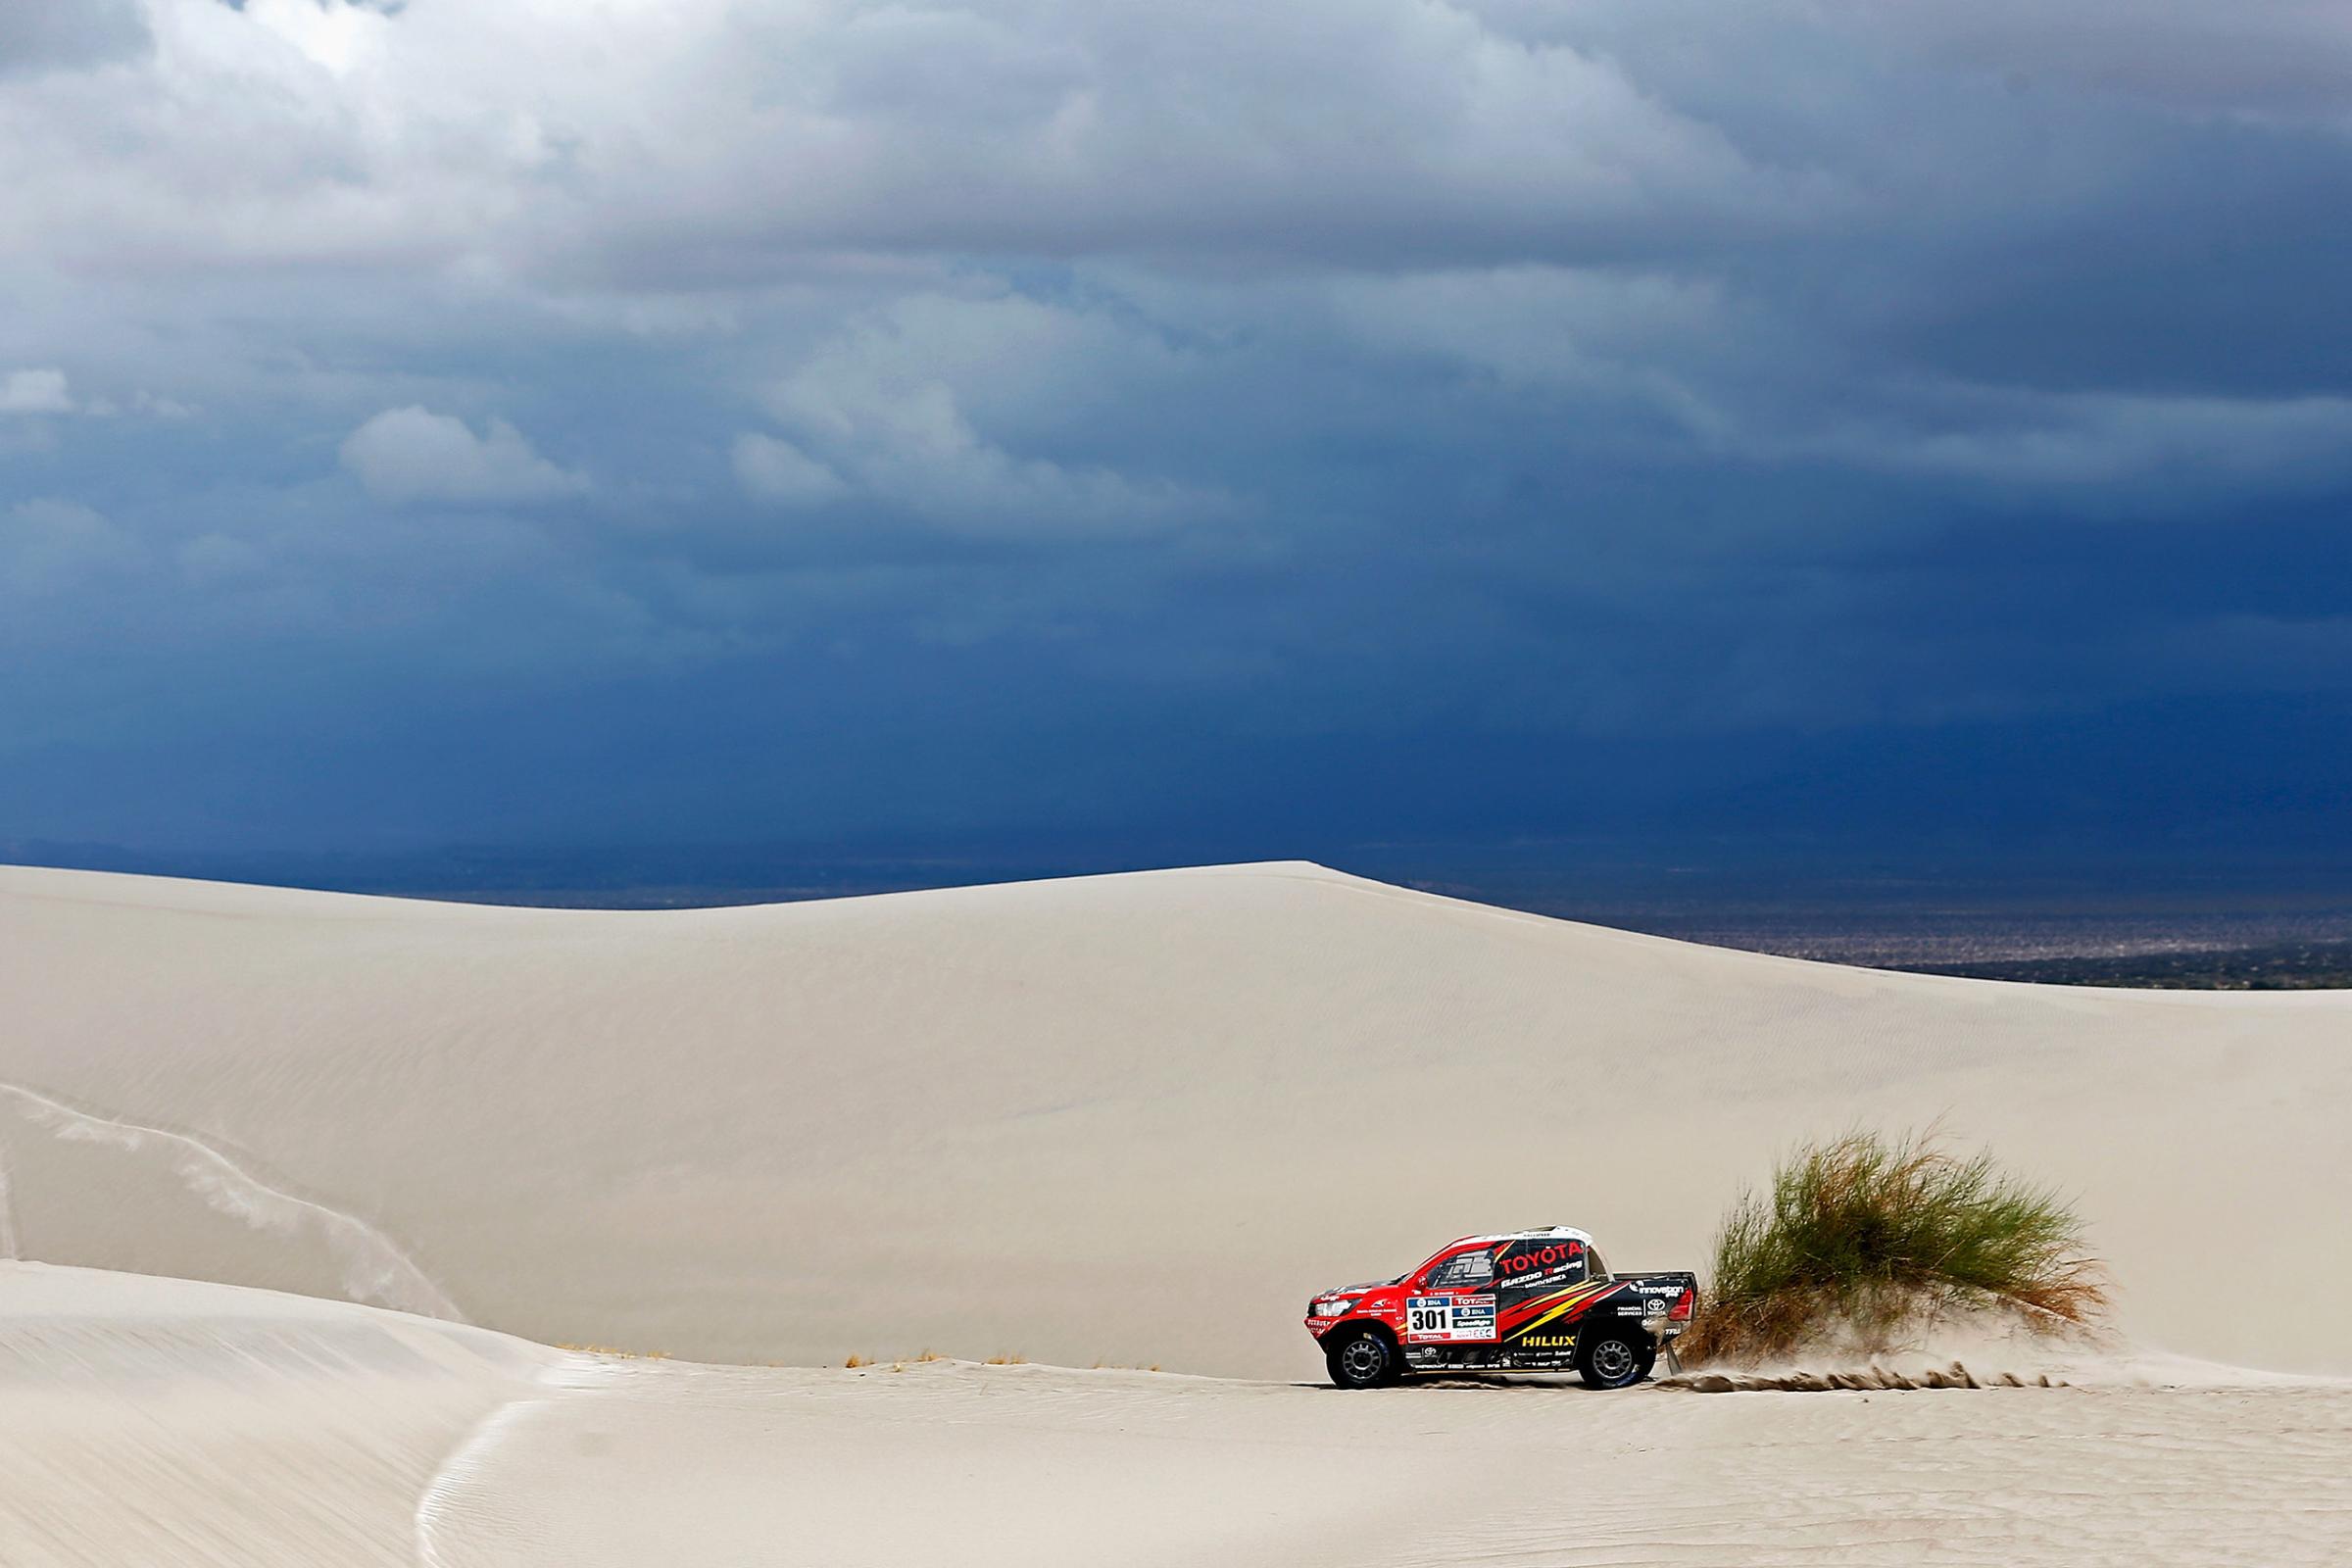 Giniel De Villiers of South Africa and Dirk Von Zitzewitz of Germany in the Toyota Hilux for Toyota Gazoo Racing compete on day 11 stage ten between Belen and La Rioja during the 2016 Dakar Rally on Jan. 13, 2016 in near Fiambala, Argentina.